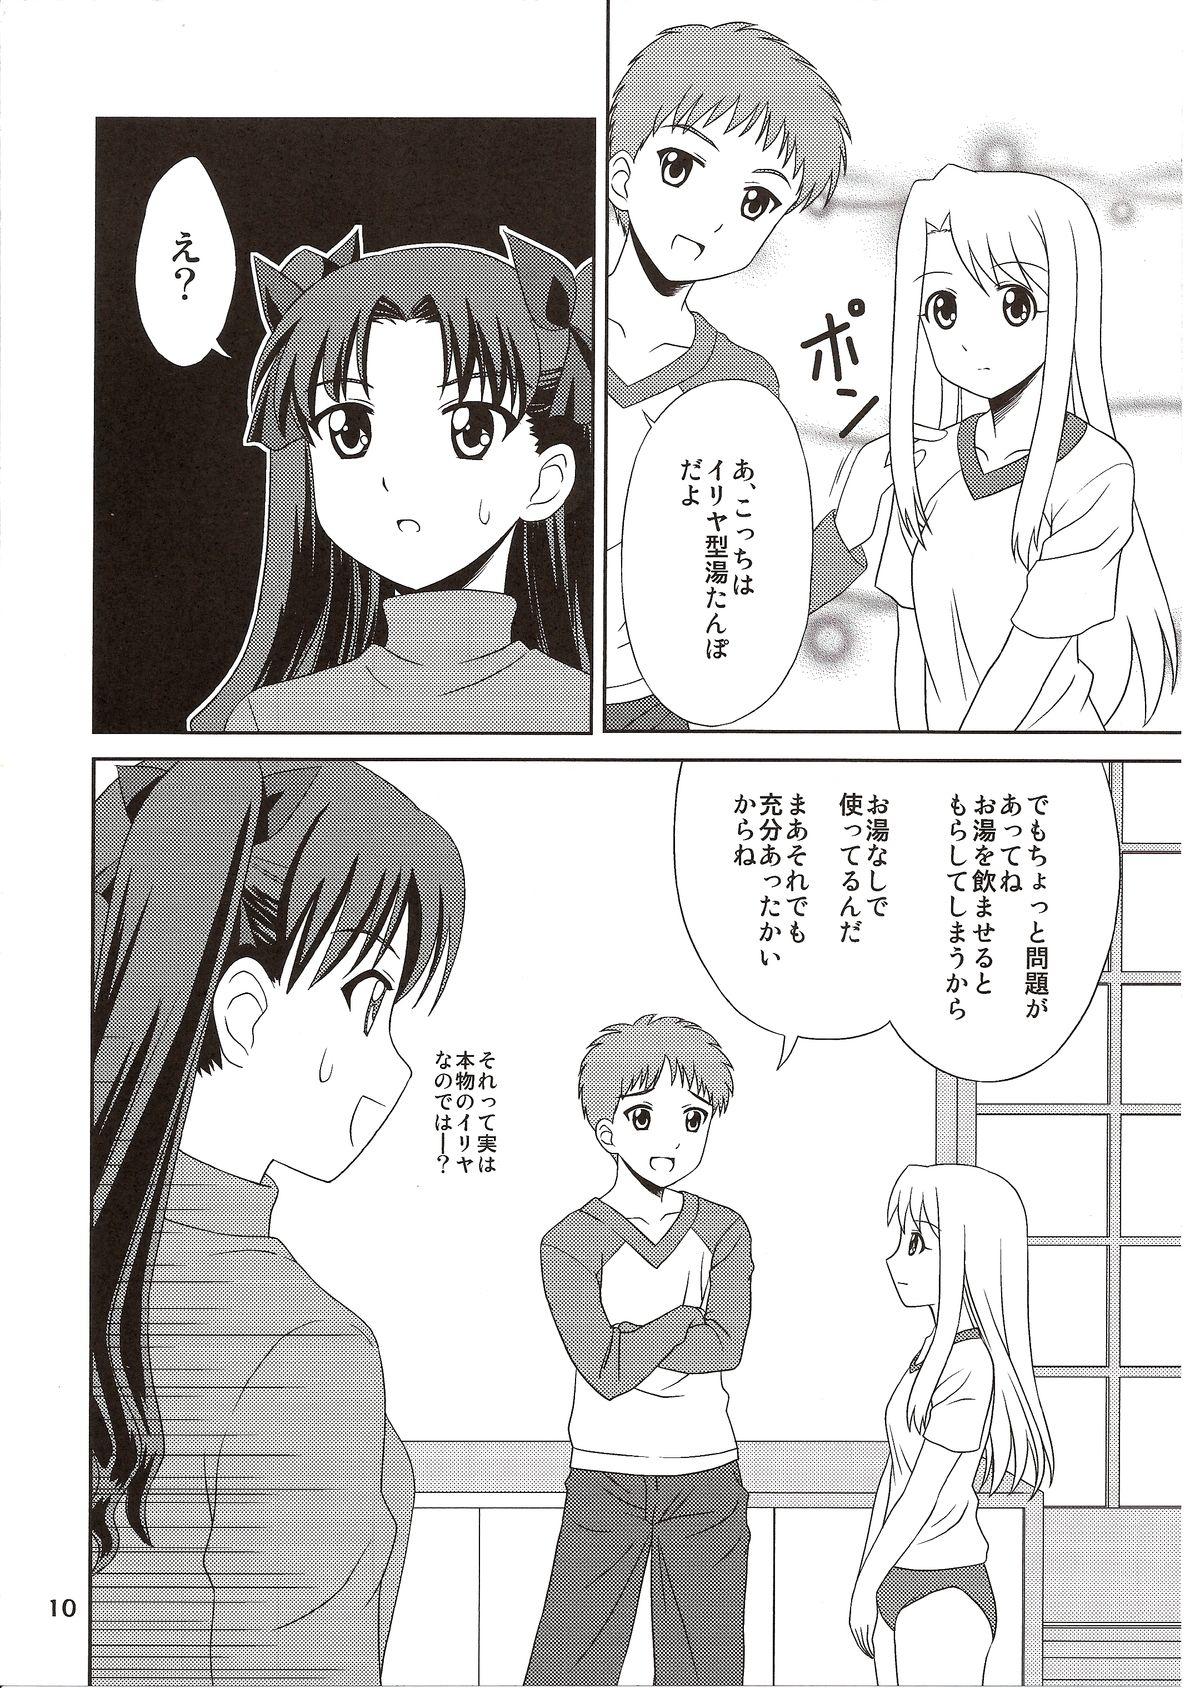 Twinks Carni☆Phan tic factory 5 - Fate stay night Fate zero Family Sex - Page 10